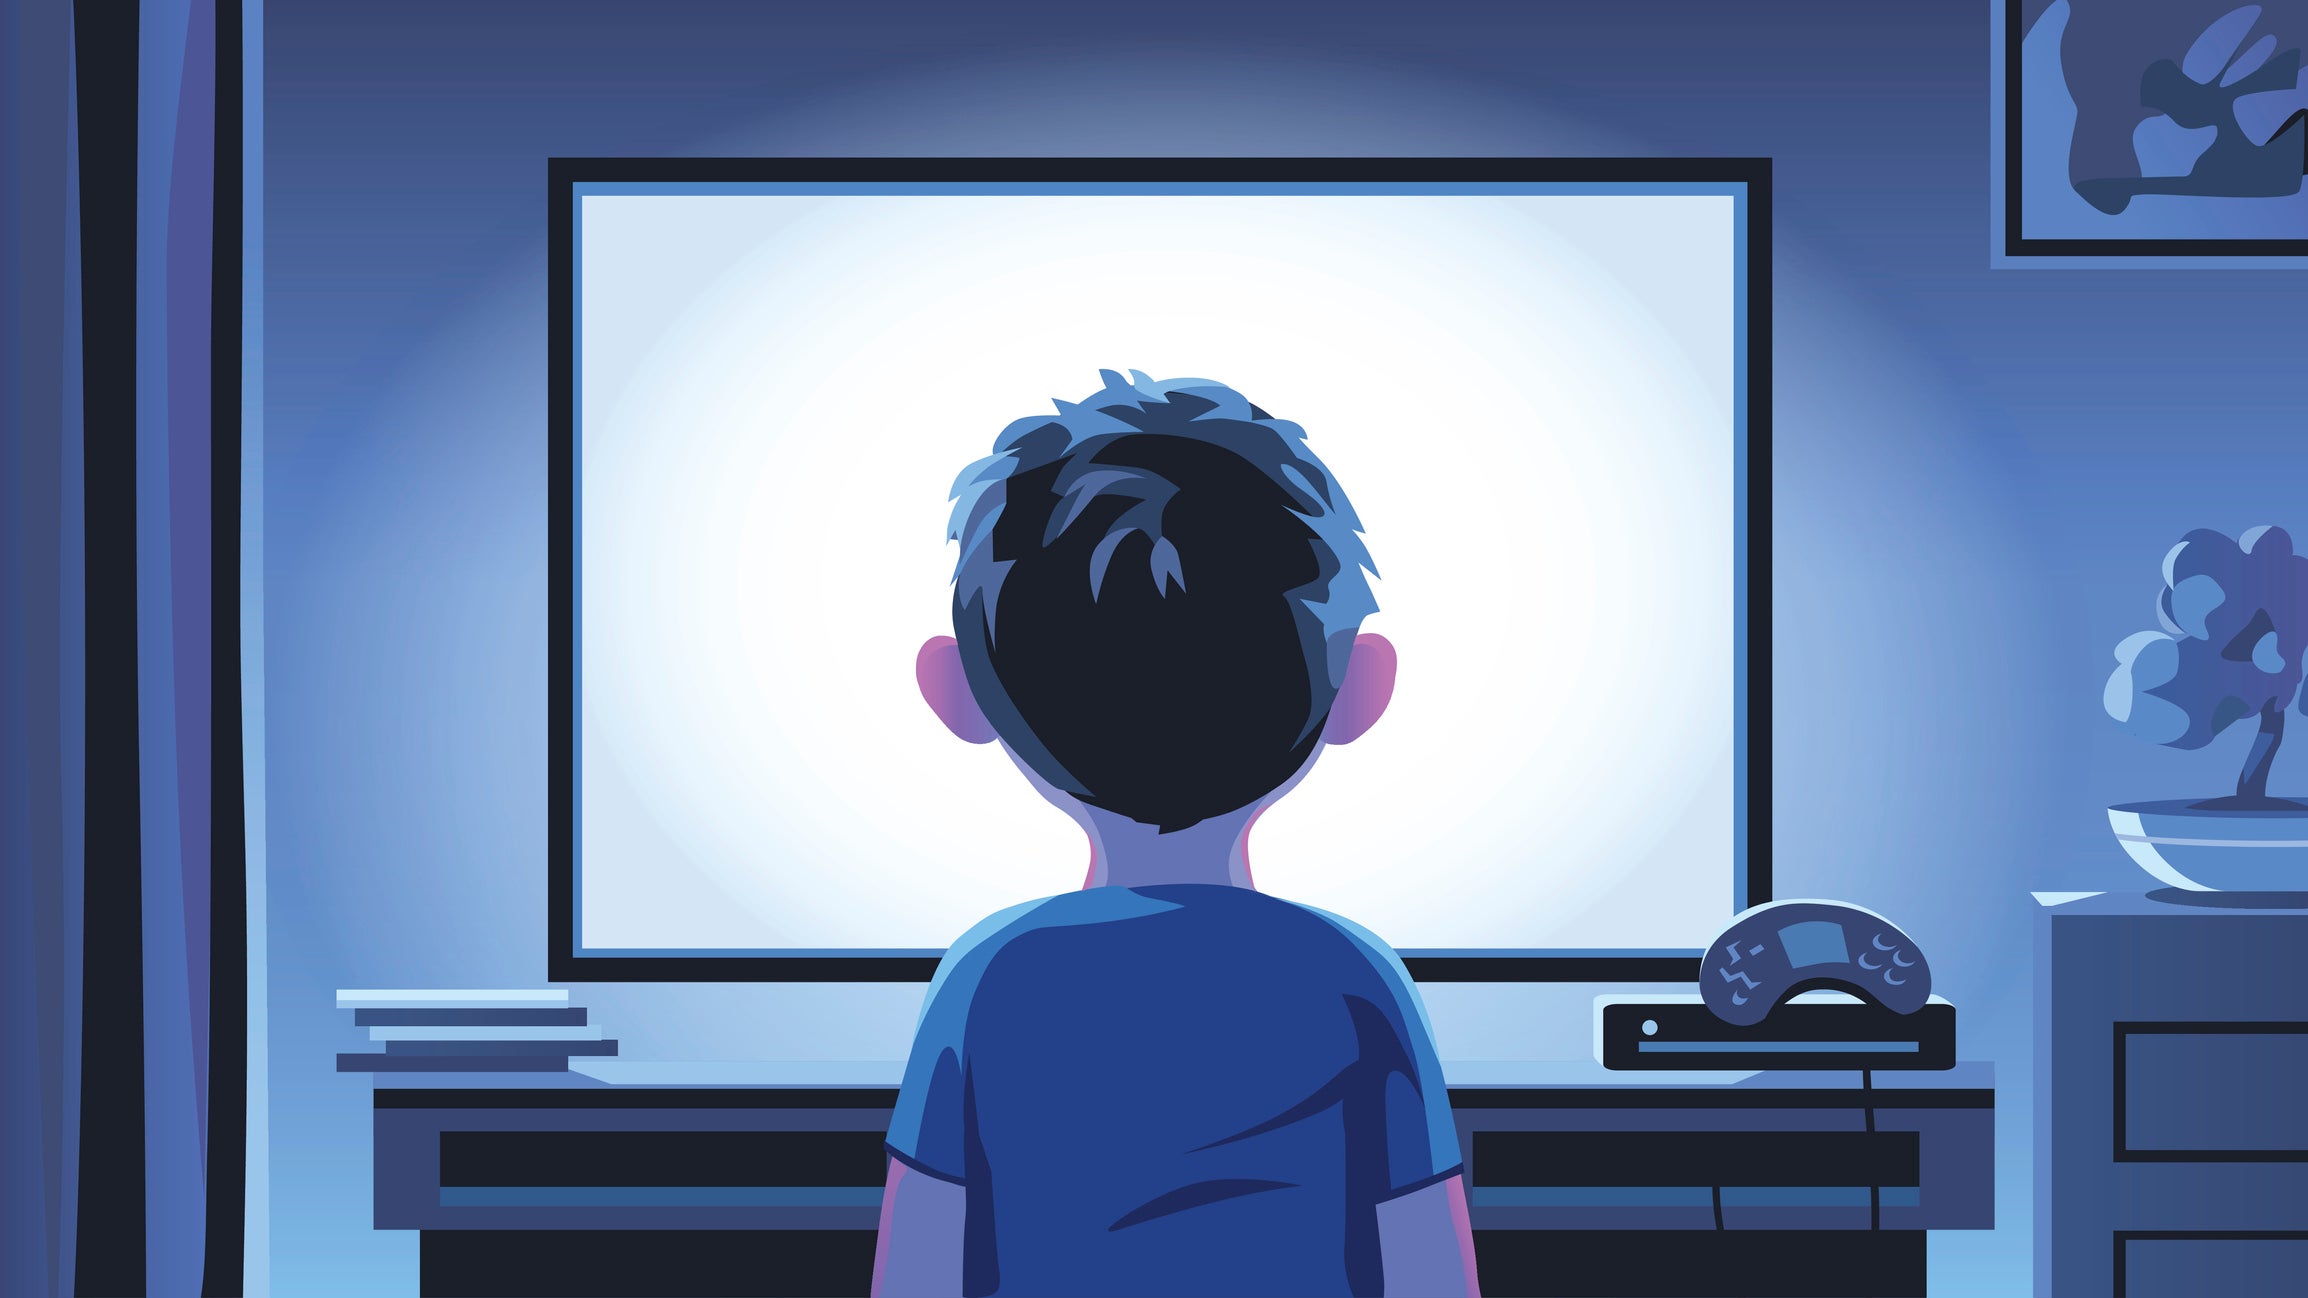 A child stares at the screen indoors